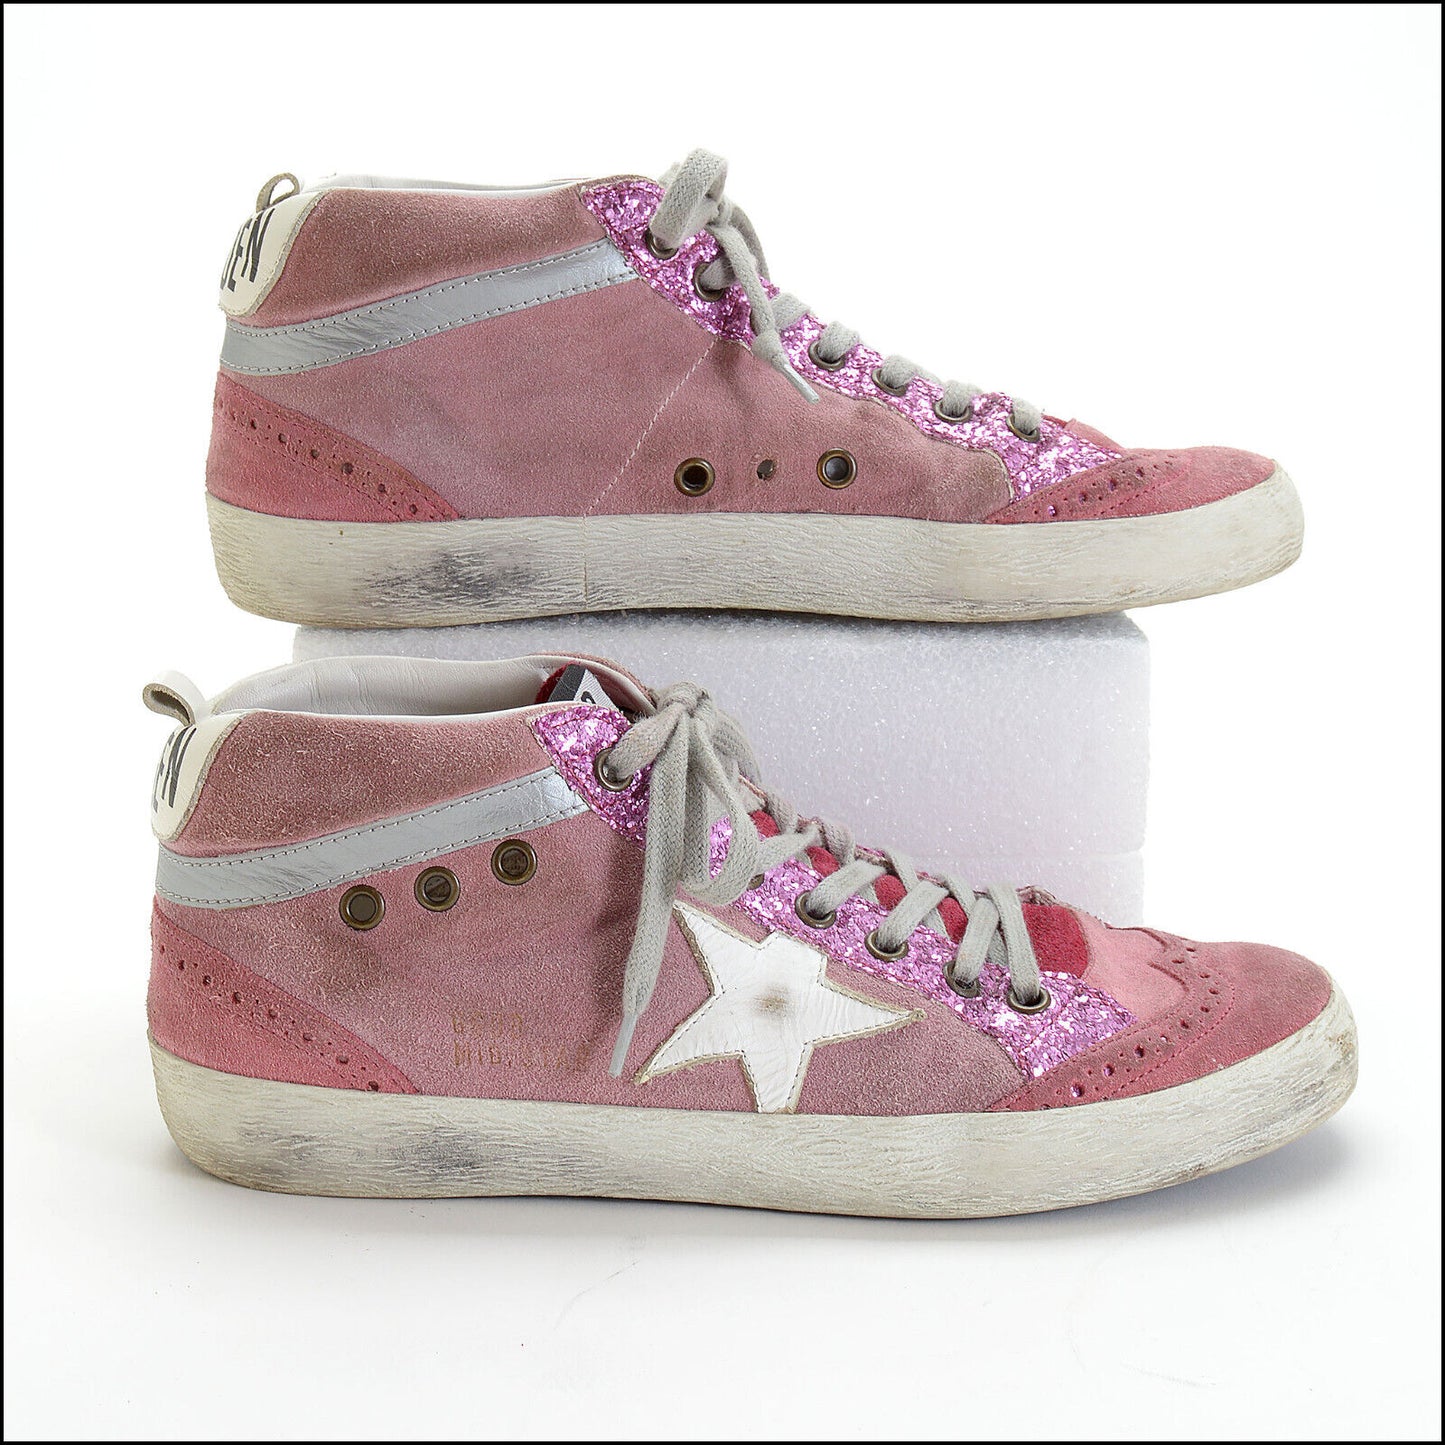 RDC13578 Authentic GOLDEN GOOSE Pink Suede Mid Star Sneakers size 39